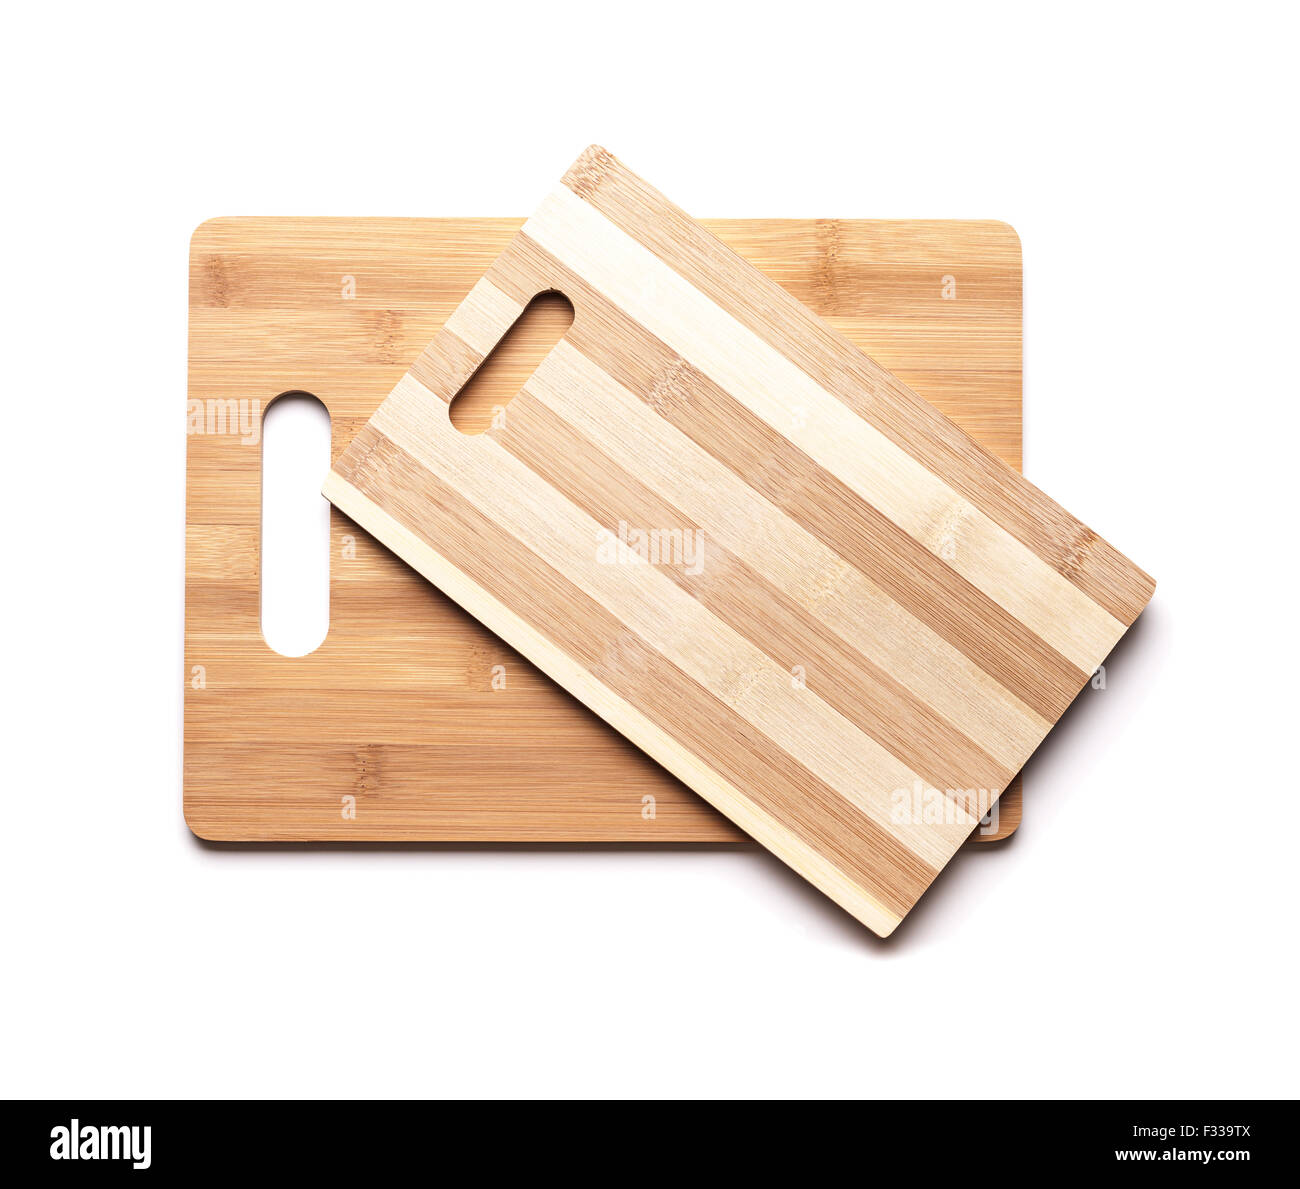 https://c8.alamy.com/comp/F339TX/new-cutting-boards-made-of-bamboo-planks-on-white-table-background-F339TX.jpg